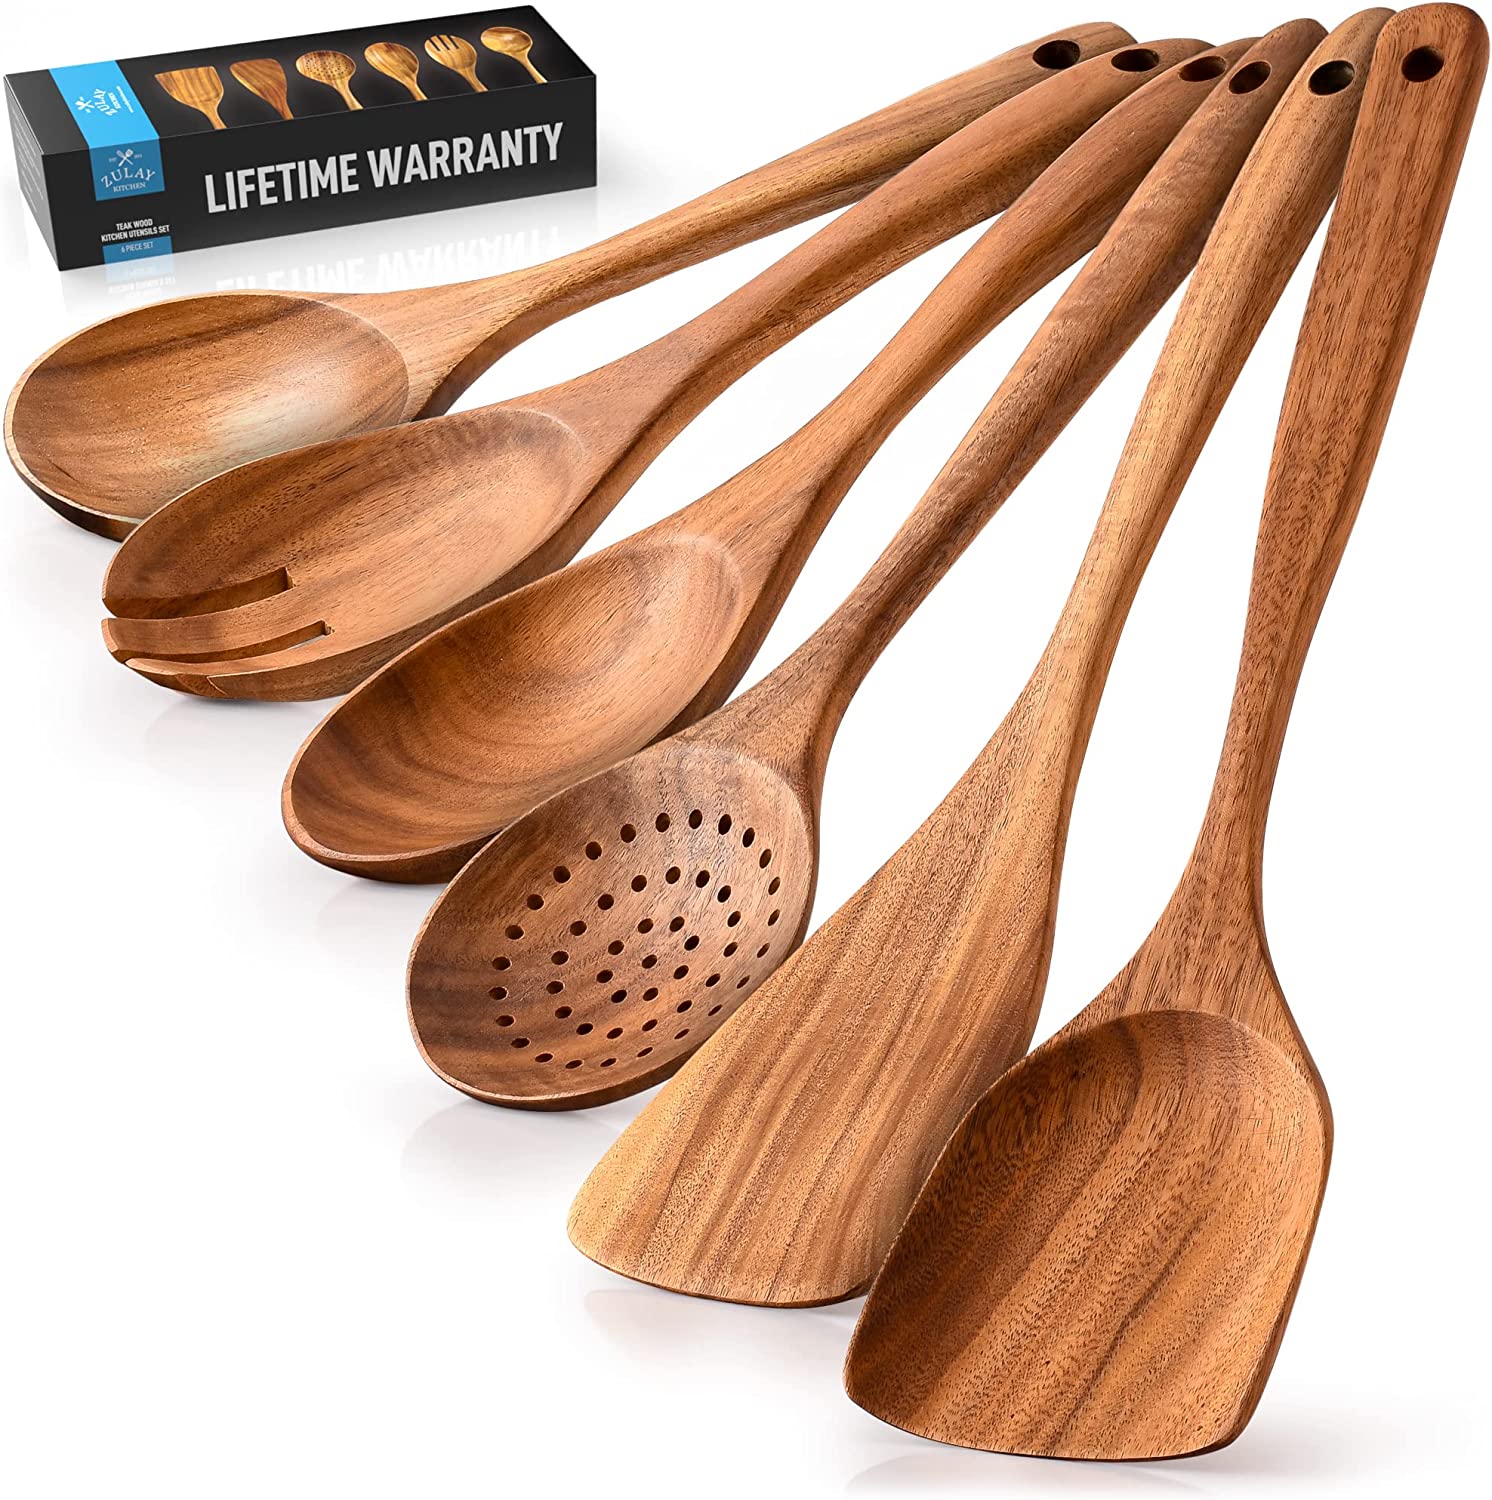 Non Toxic Wooden Cooking Utensils3